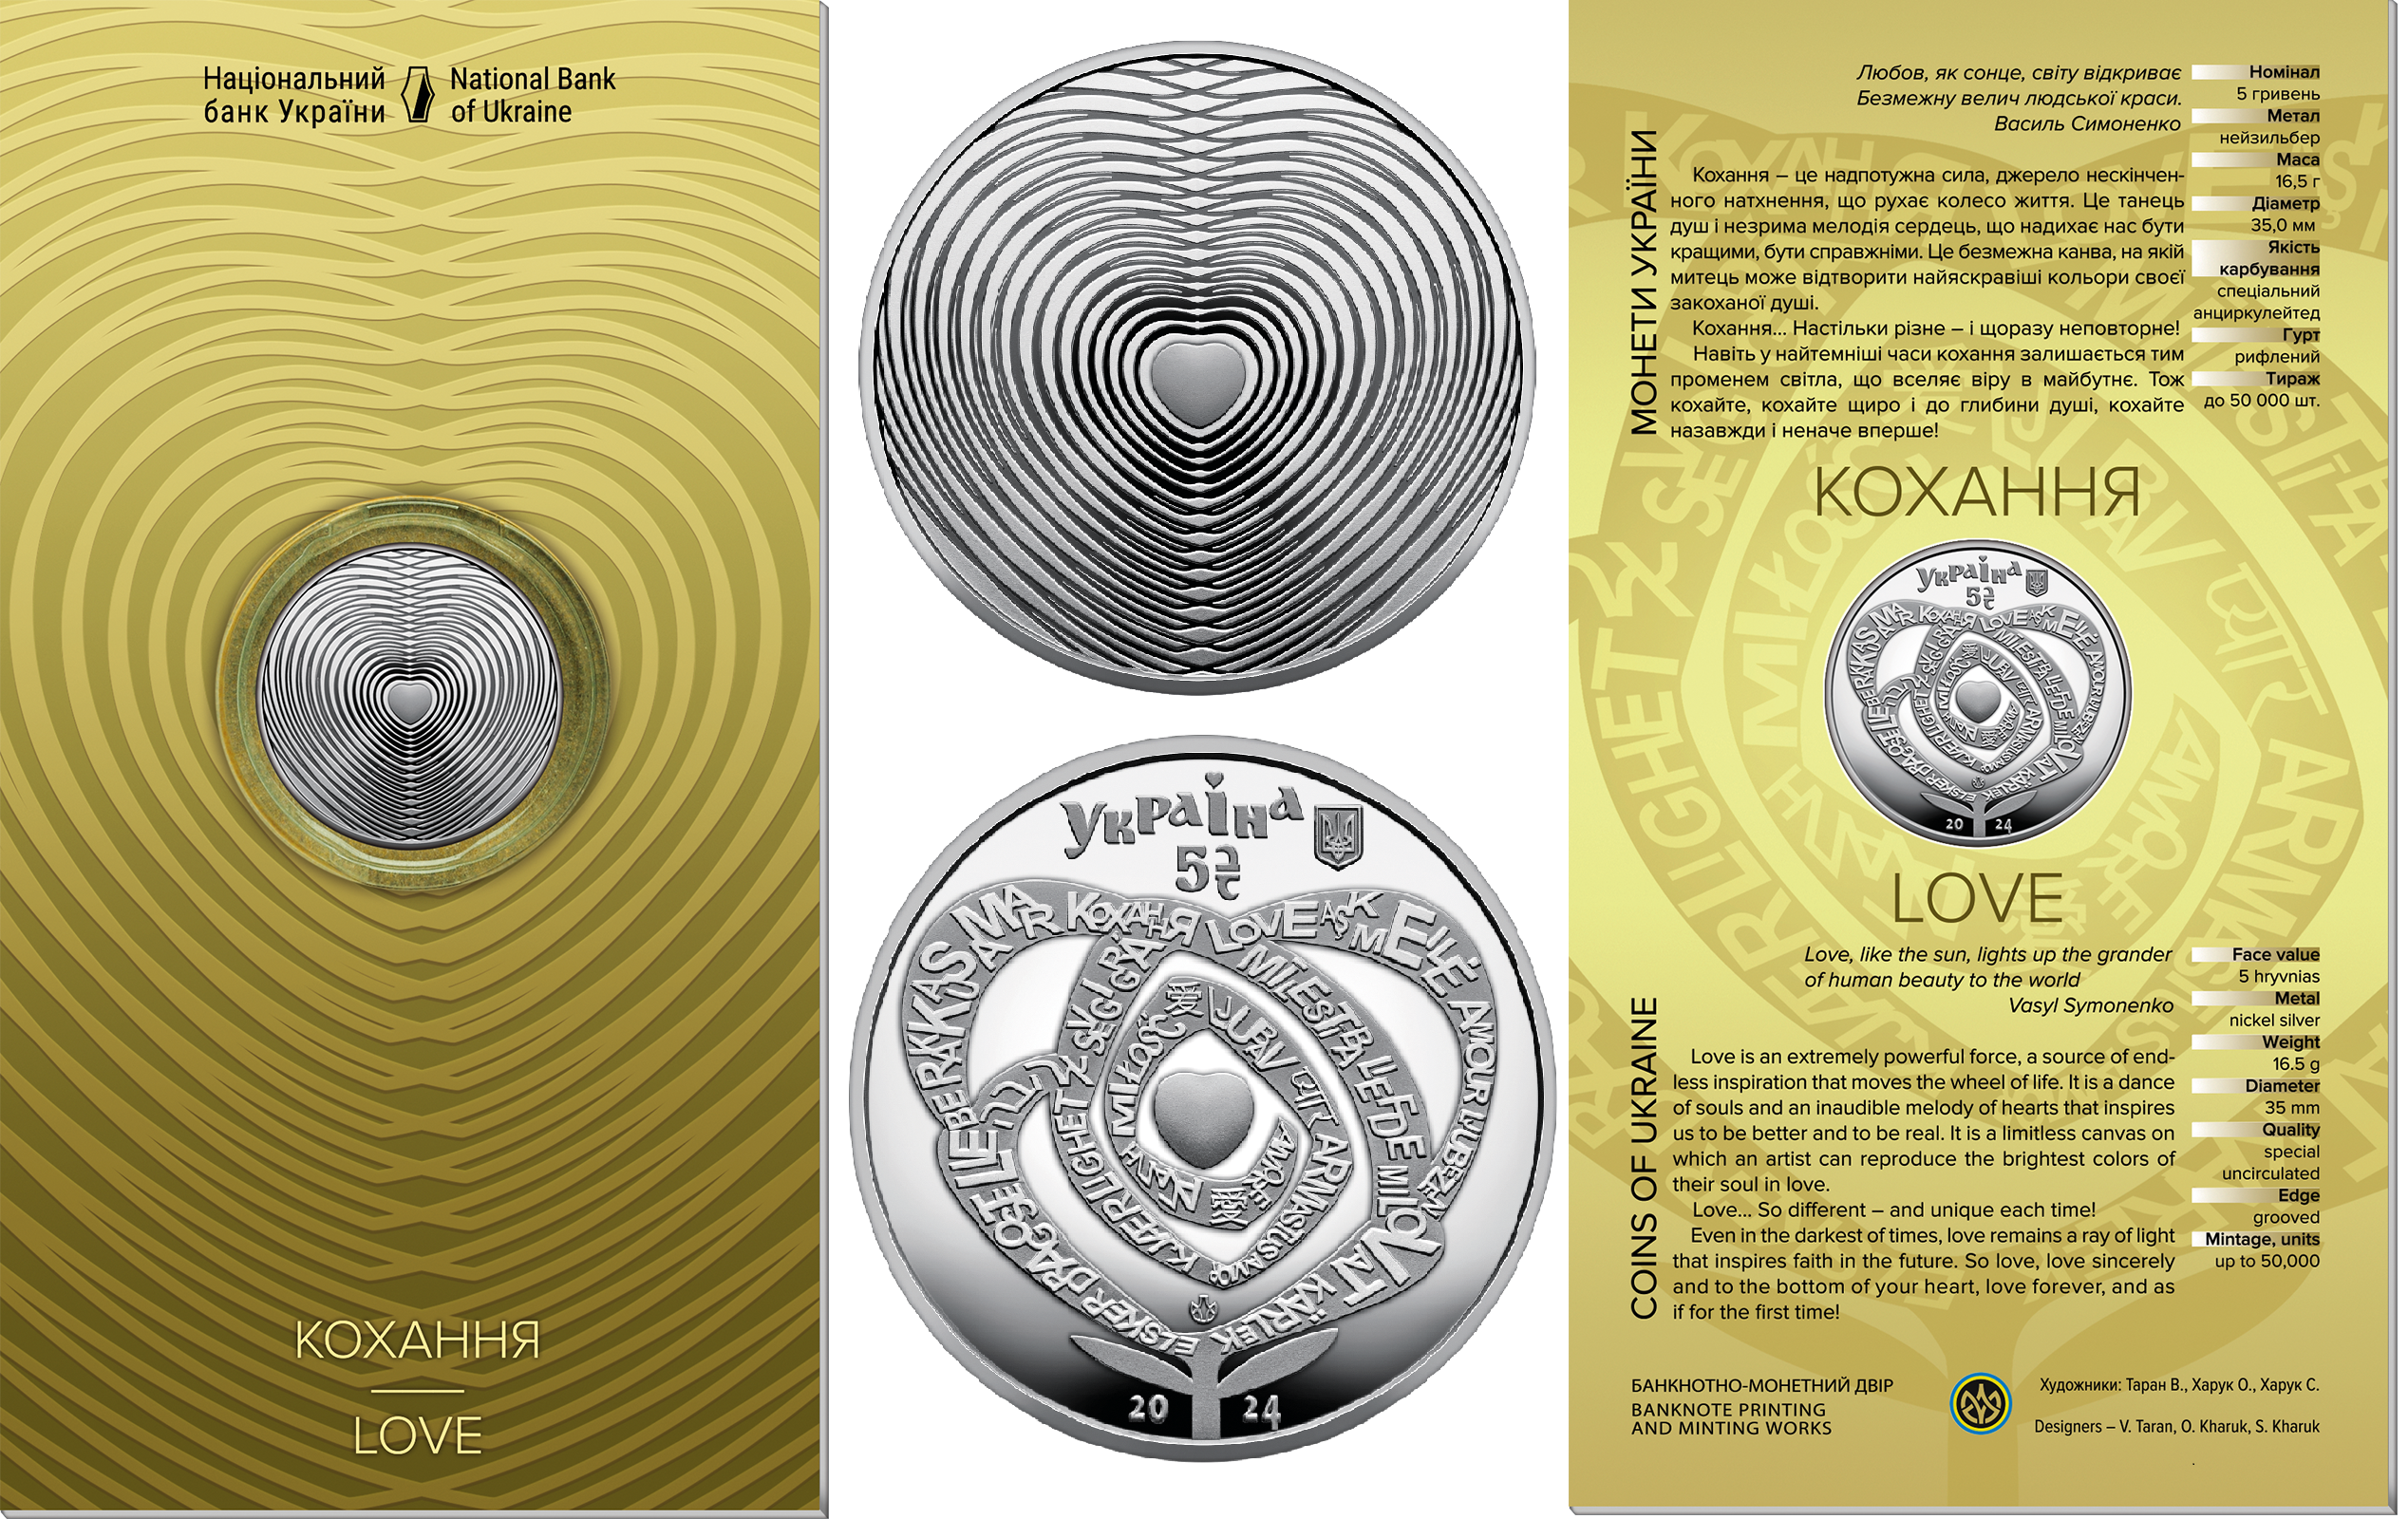 Sale of commemorative coins from MTB BANK • buy commemorative coins in Ukraine at MTB BANK - photo 3 - mtb.ua